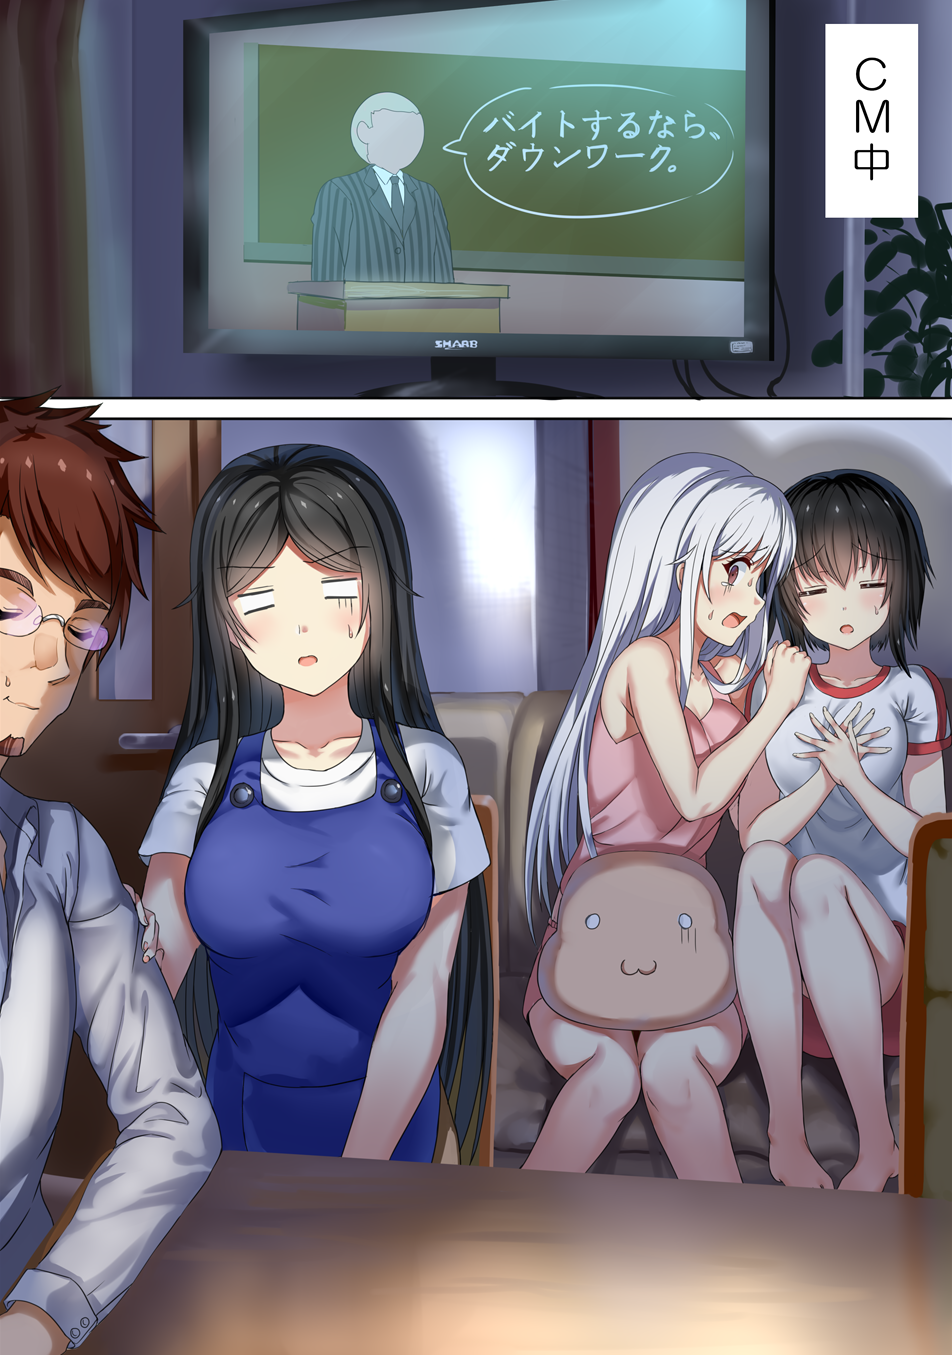 3girls aldehyde barefoot black_hair blush brand_name_imitation breasts brown_hair cleavage closed_eyes couch dark gym_shirt hands_on_own_chest highres imoko_(neeko's_sister) indoors large_breasts long_hair matsumoto_hitoshi medium_breasts multiple_girls neeko neeko's_father neeko's_mother open_mouth original plant scared sharp_corporation shirt short_hair shorts silver_hair sitting sleeveless sweat tears television townwork translated watching_television